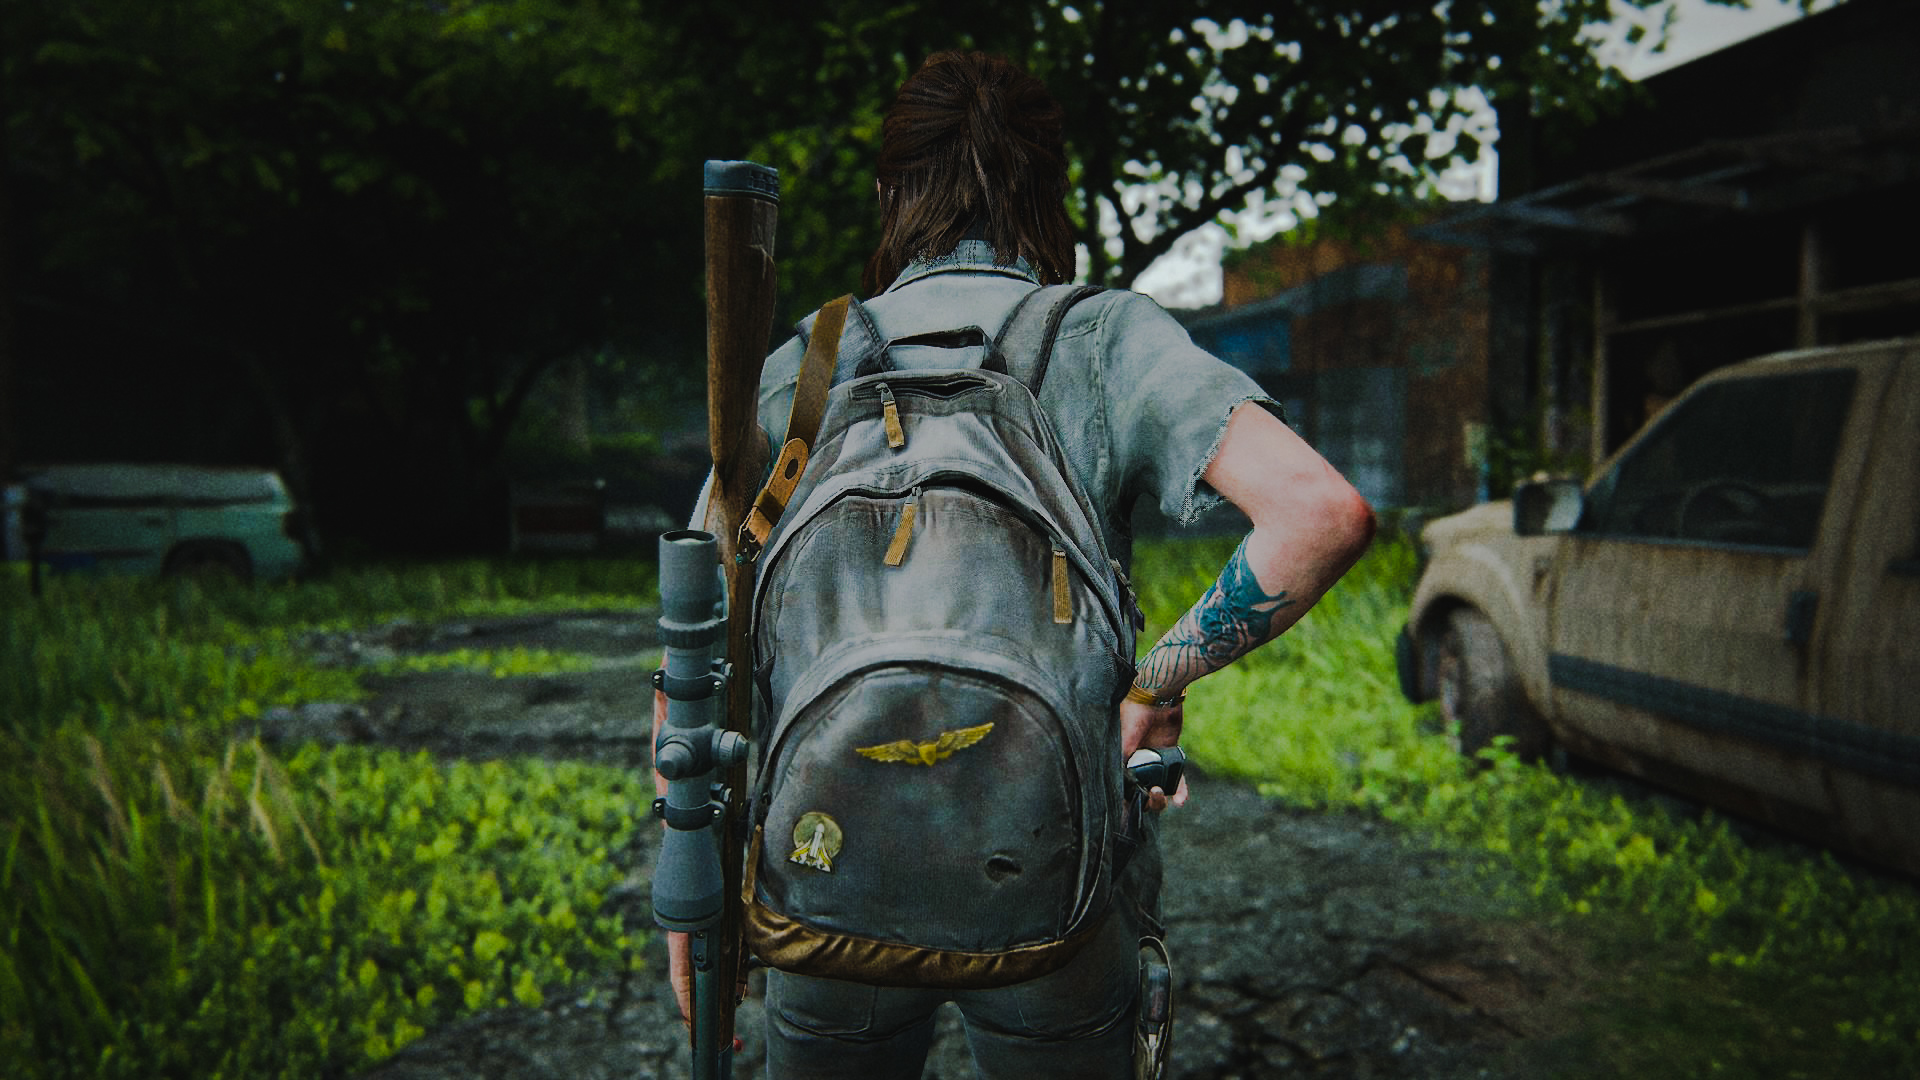 General 1920x1080 The Last of Us The Last of Us 2 screen shot Naughty Dog video games video game characters Ellie Williams